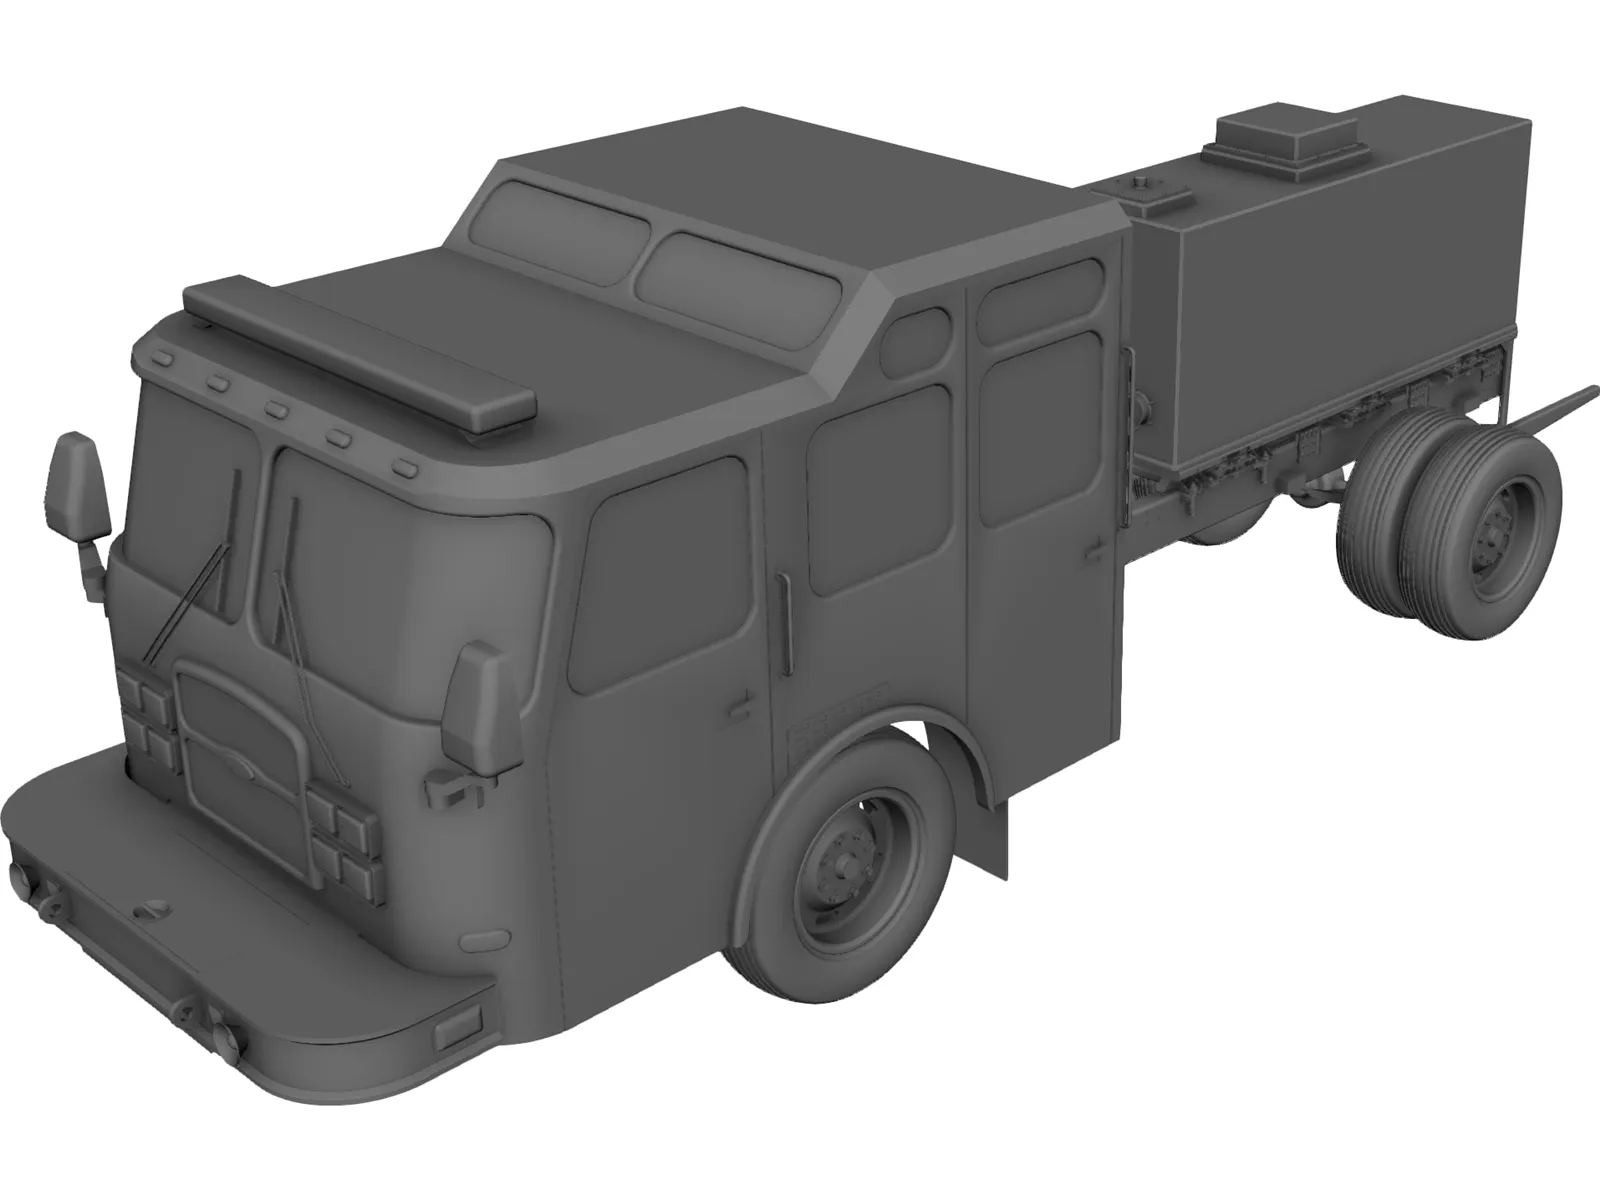 US Fire Truck Chassis 3D Model